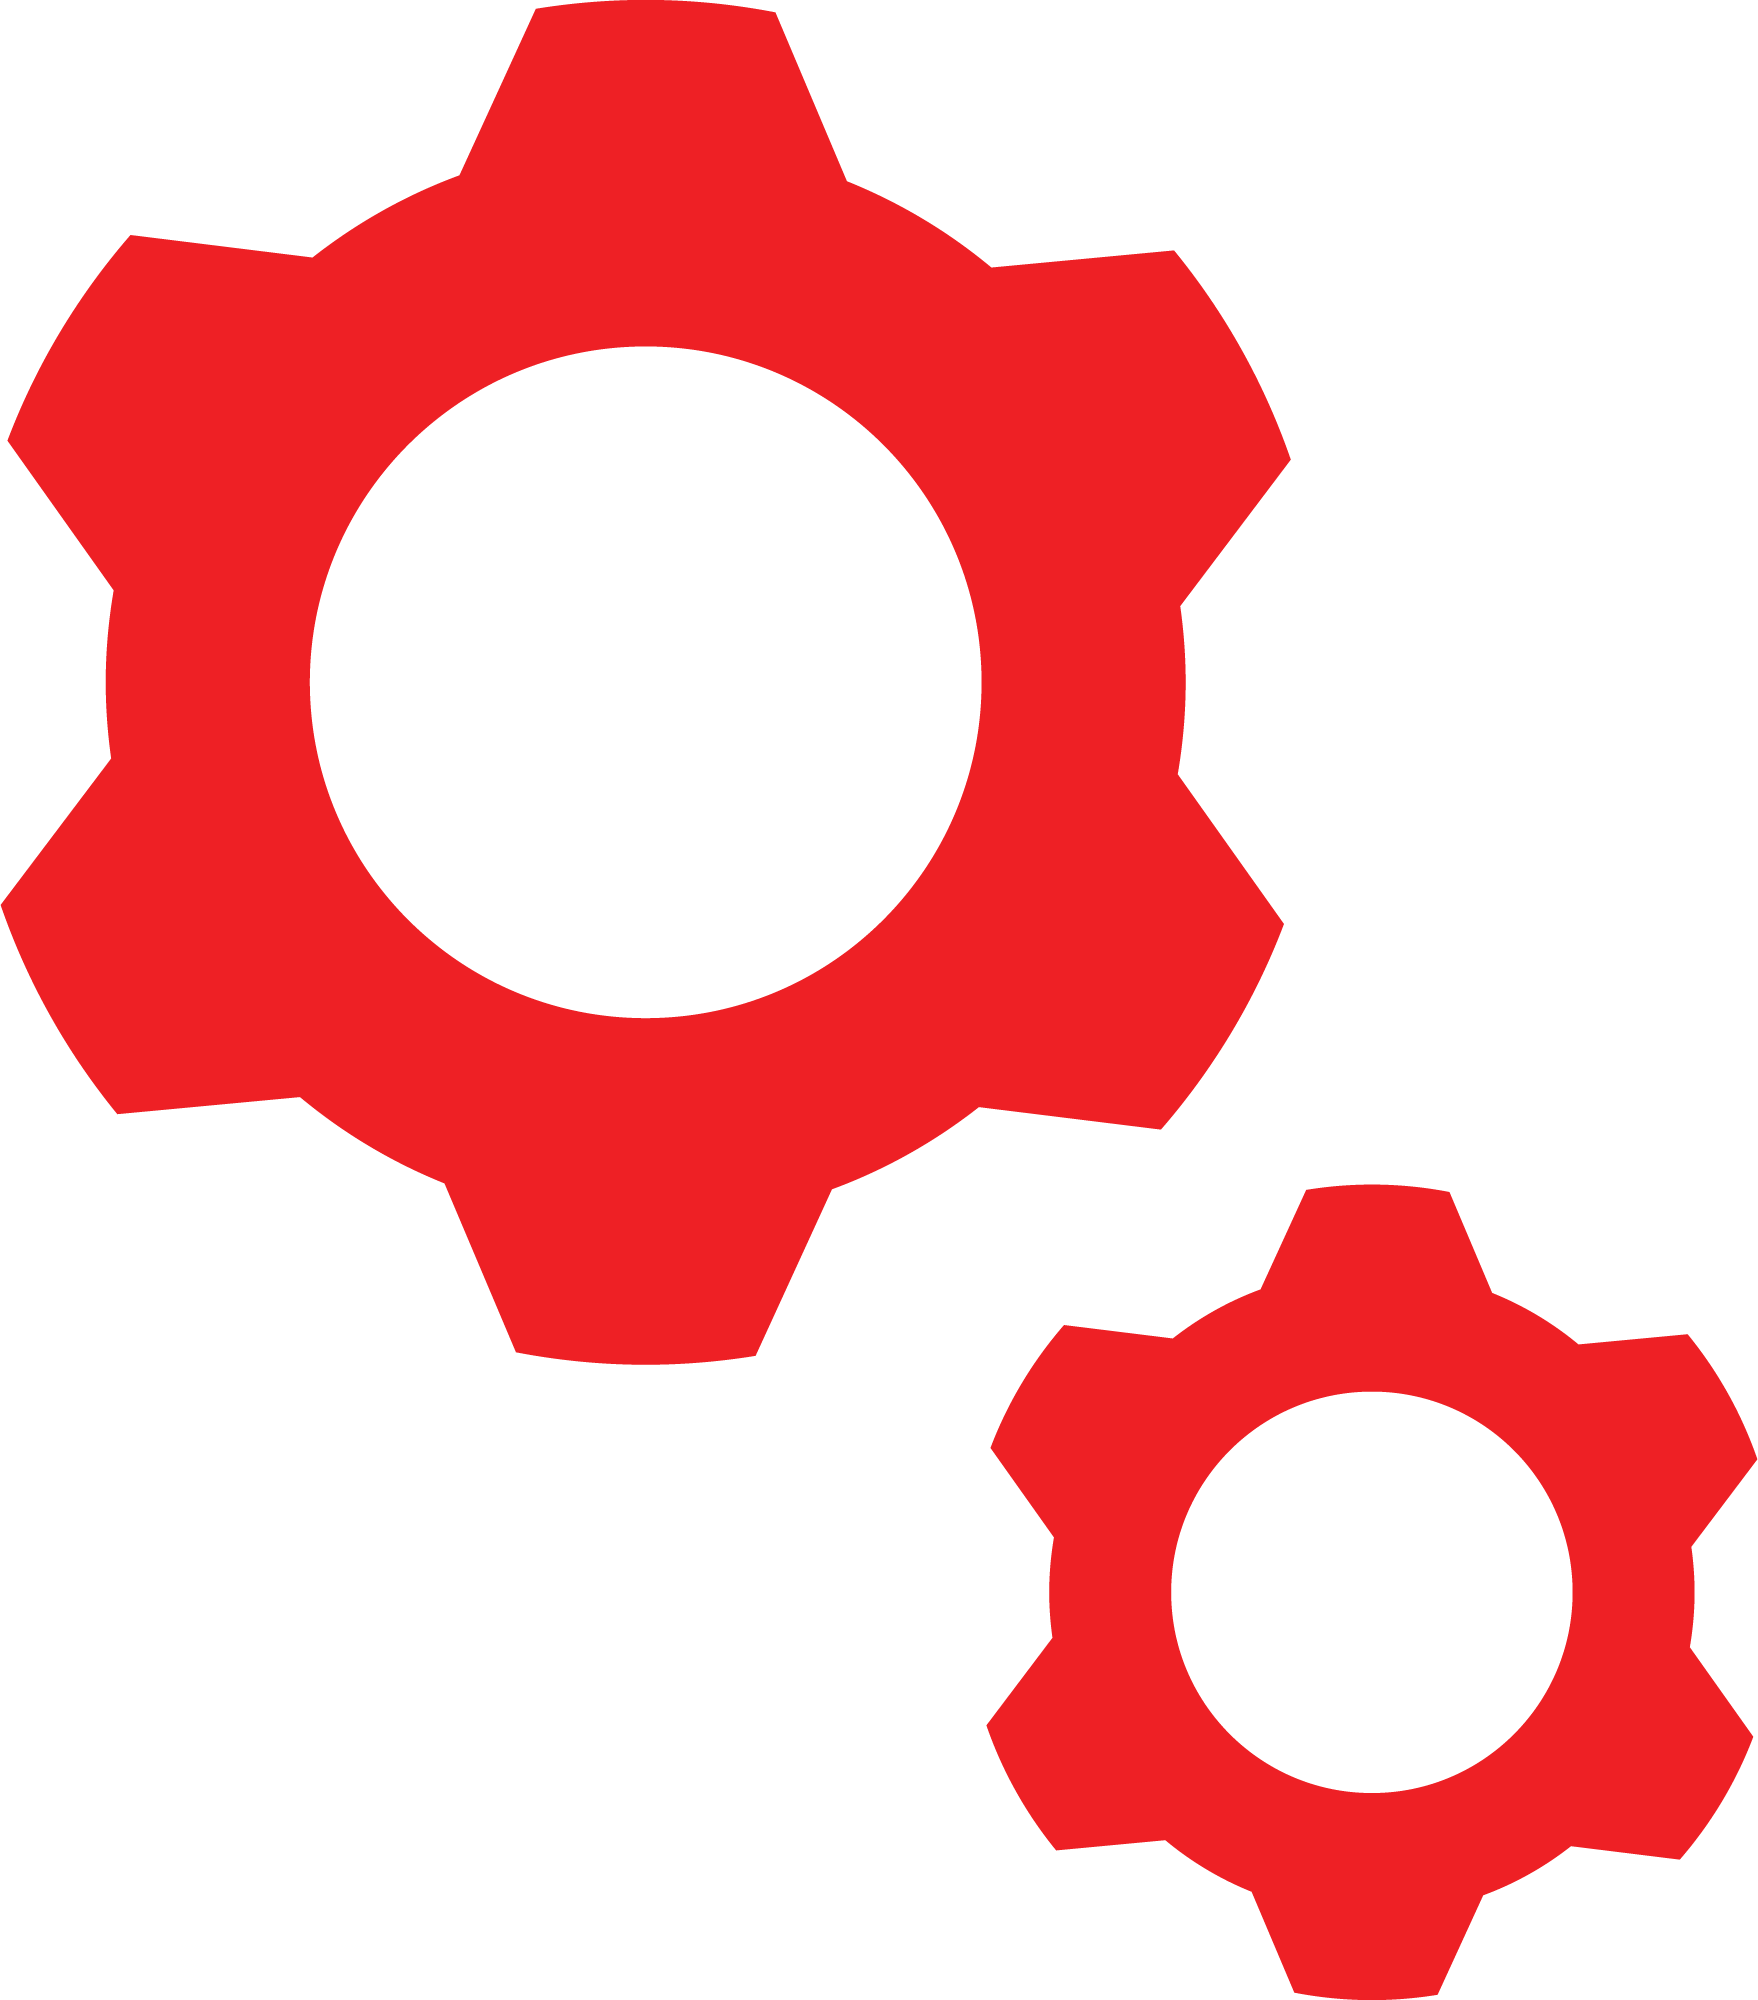 Illustration of two red gears